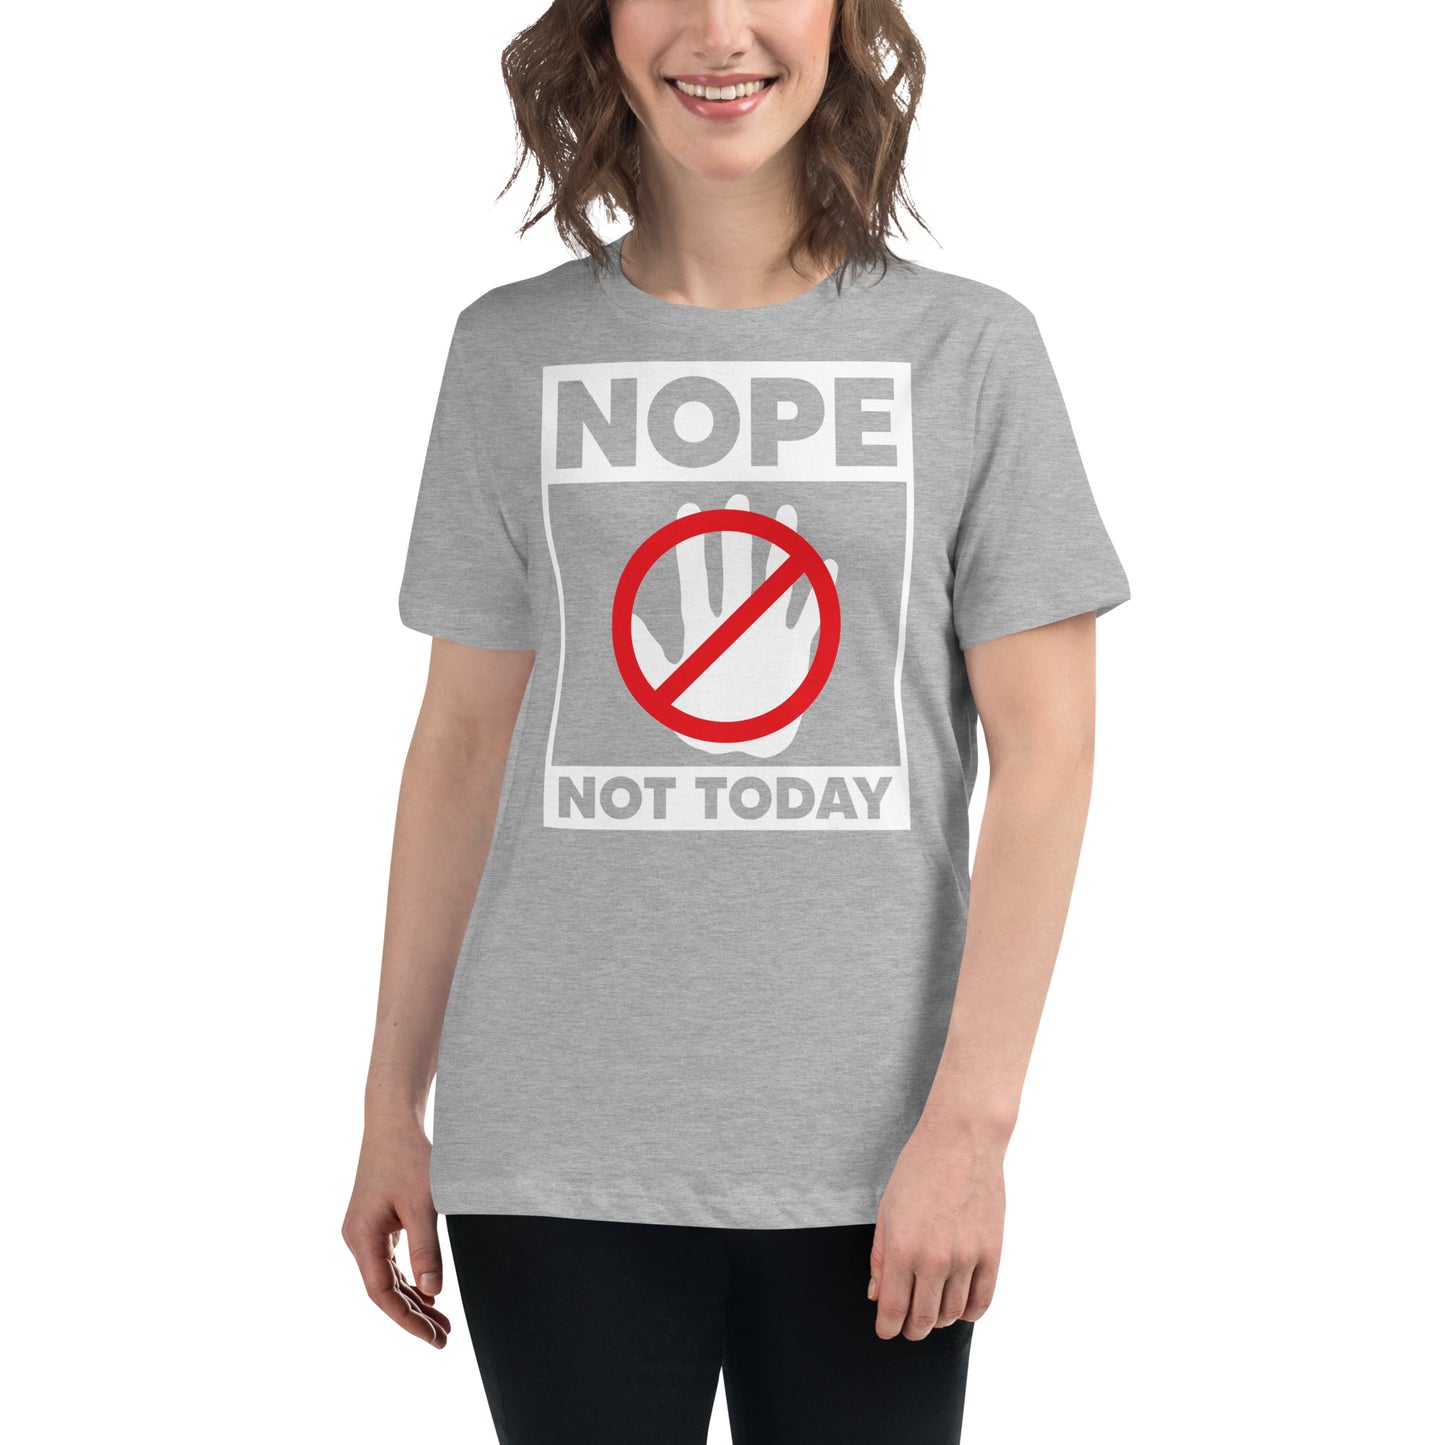 Nope Not Today  Women's Relaxed T-Shirt